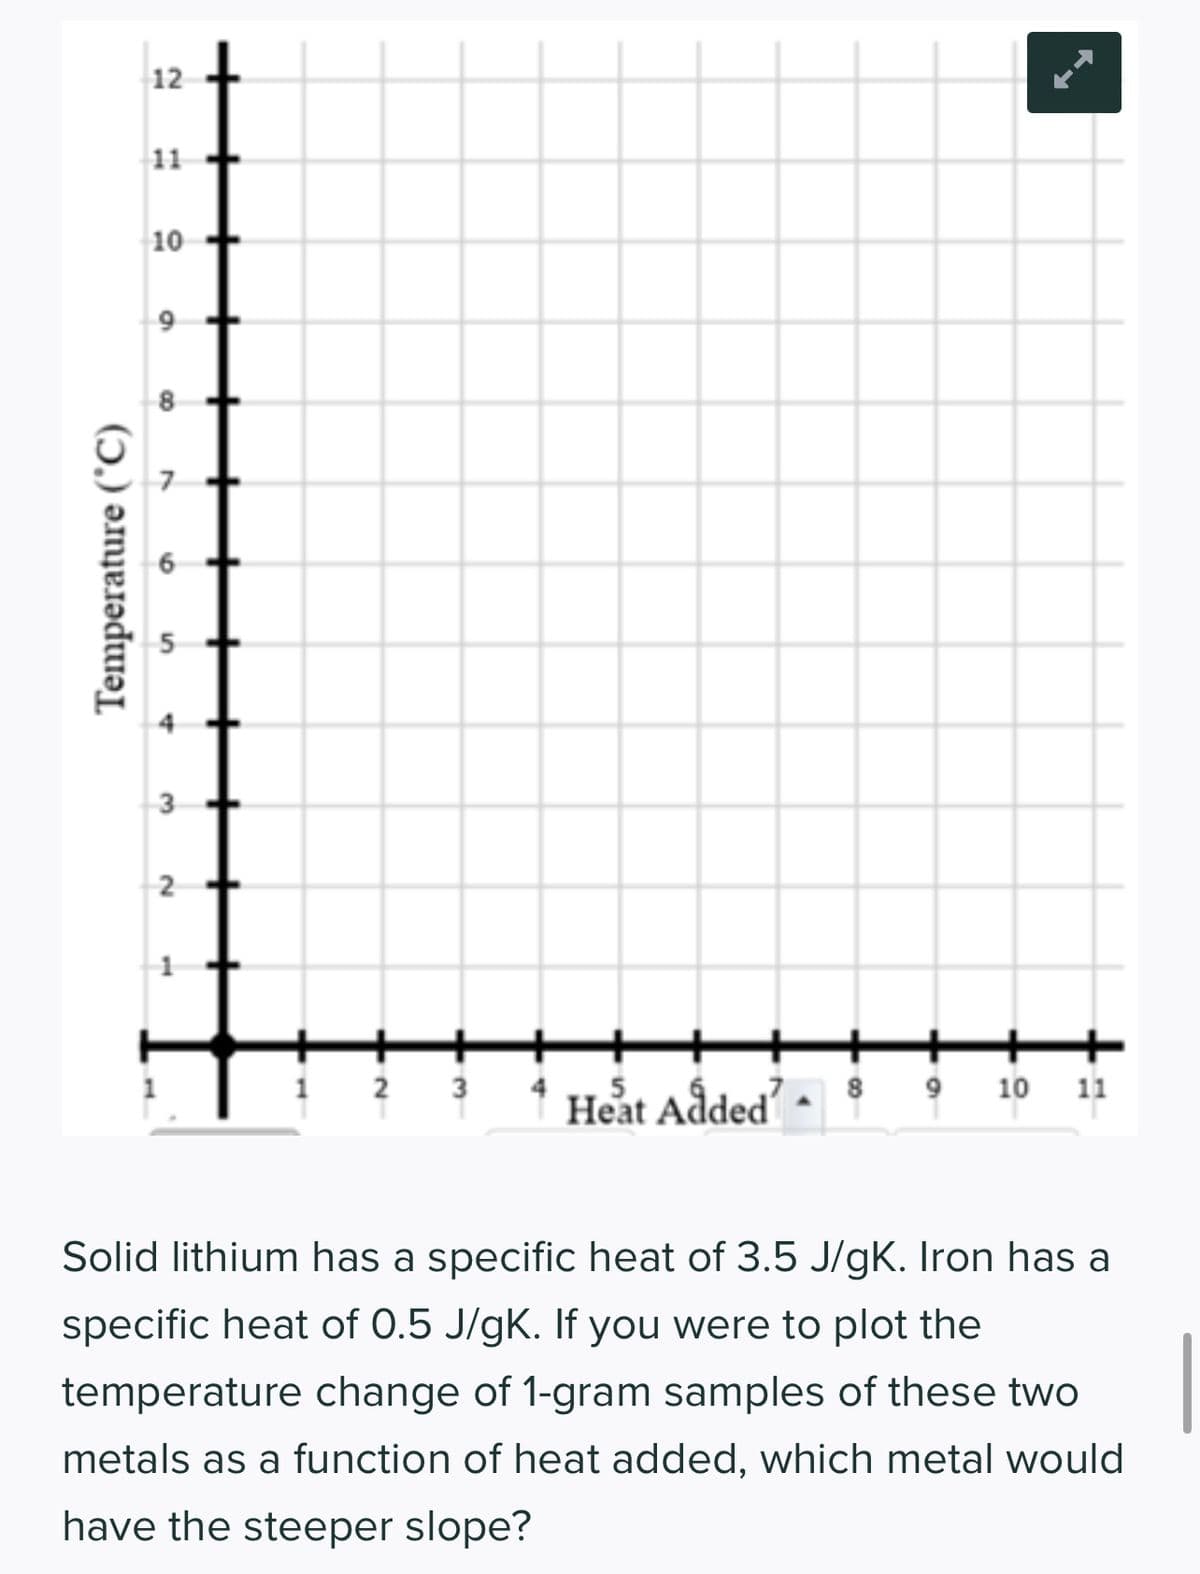 Temperature (°C)
12
11
10
9
7
3
2
2 3
Heat Added
8 9 10 11
Solid lithium has a specific heat of 3.5 J/gK. Iron has a
specific heat of 0.5 J/gK. If you were to plot the
temperature change of 1-gram samples of these two
metals as a function of heat added, which metal would
have the steeper slope?